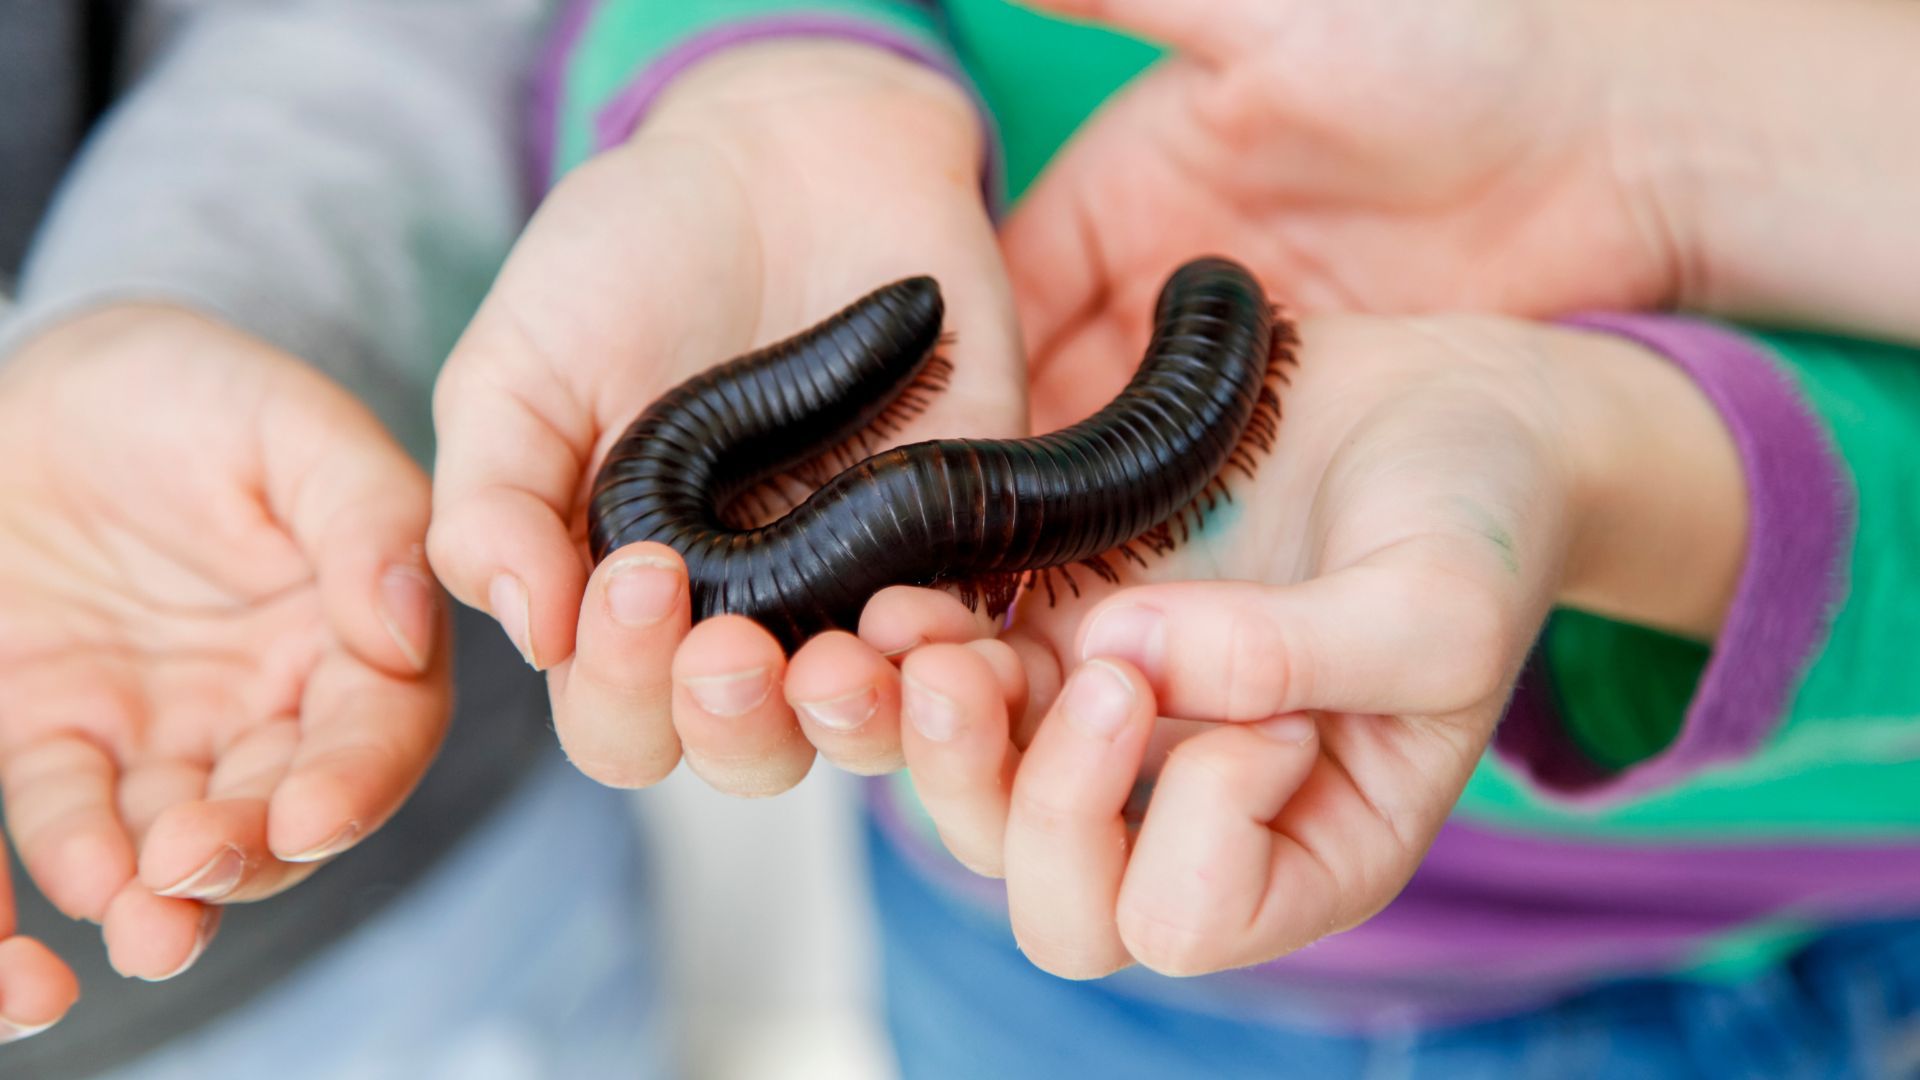 <p>                     More formally known as an Archispirostreptus gigas, giant African millipede can reach up to 15 inches long and make for a great exotic pet for beginners who are OK with having a crawly creature in their home.                   </p>